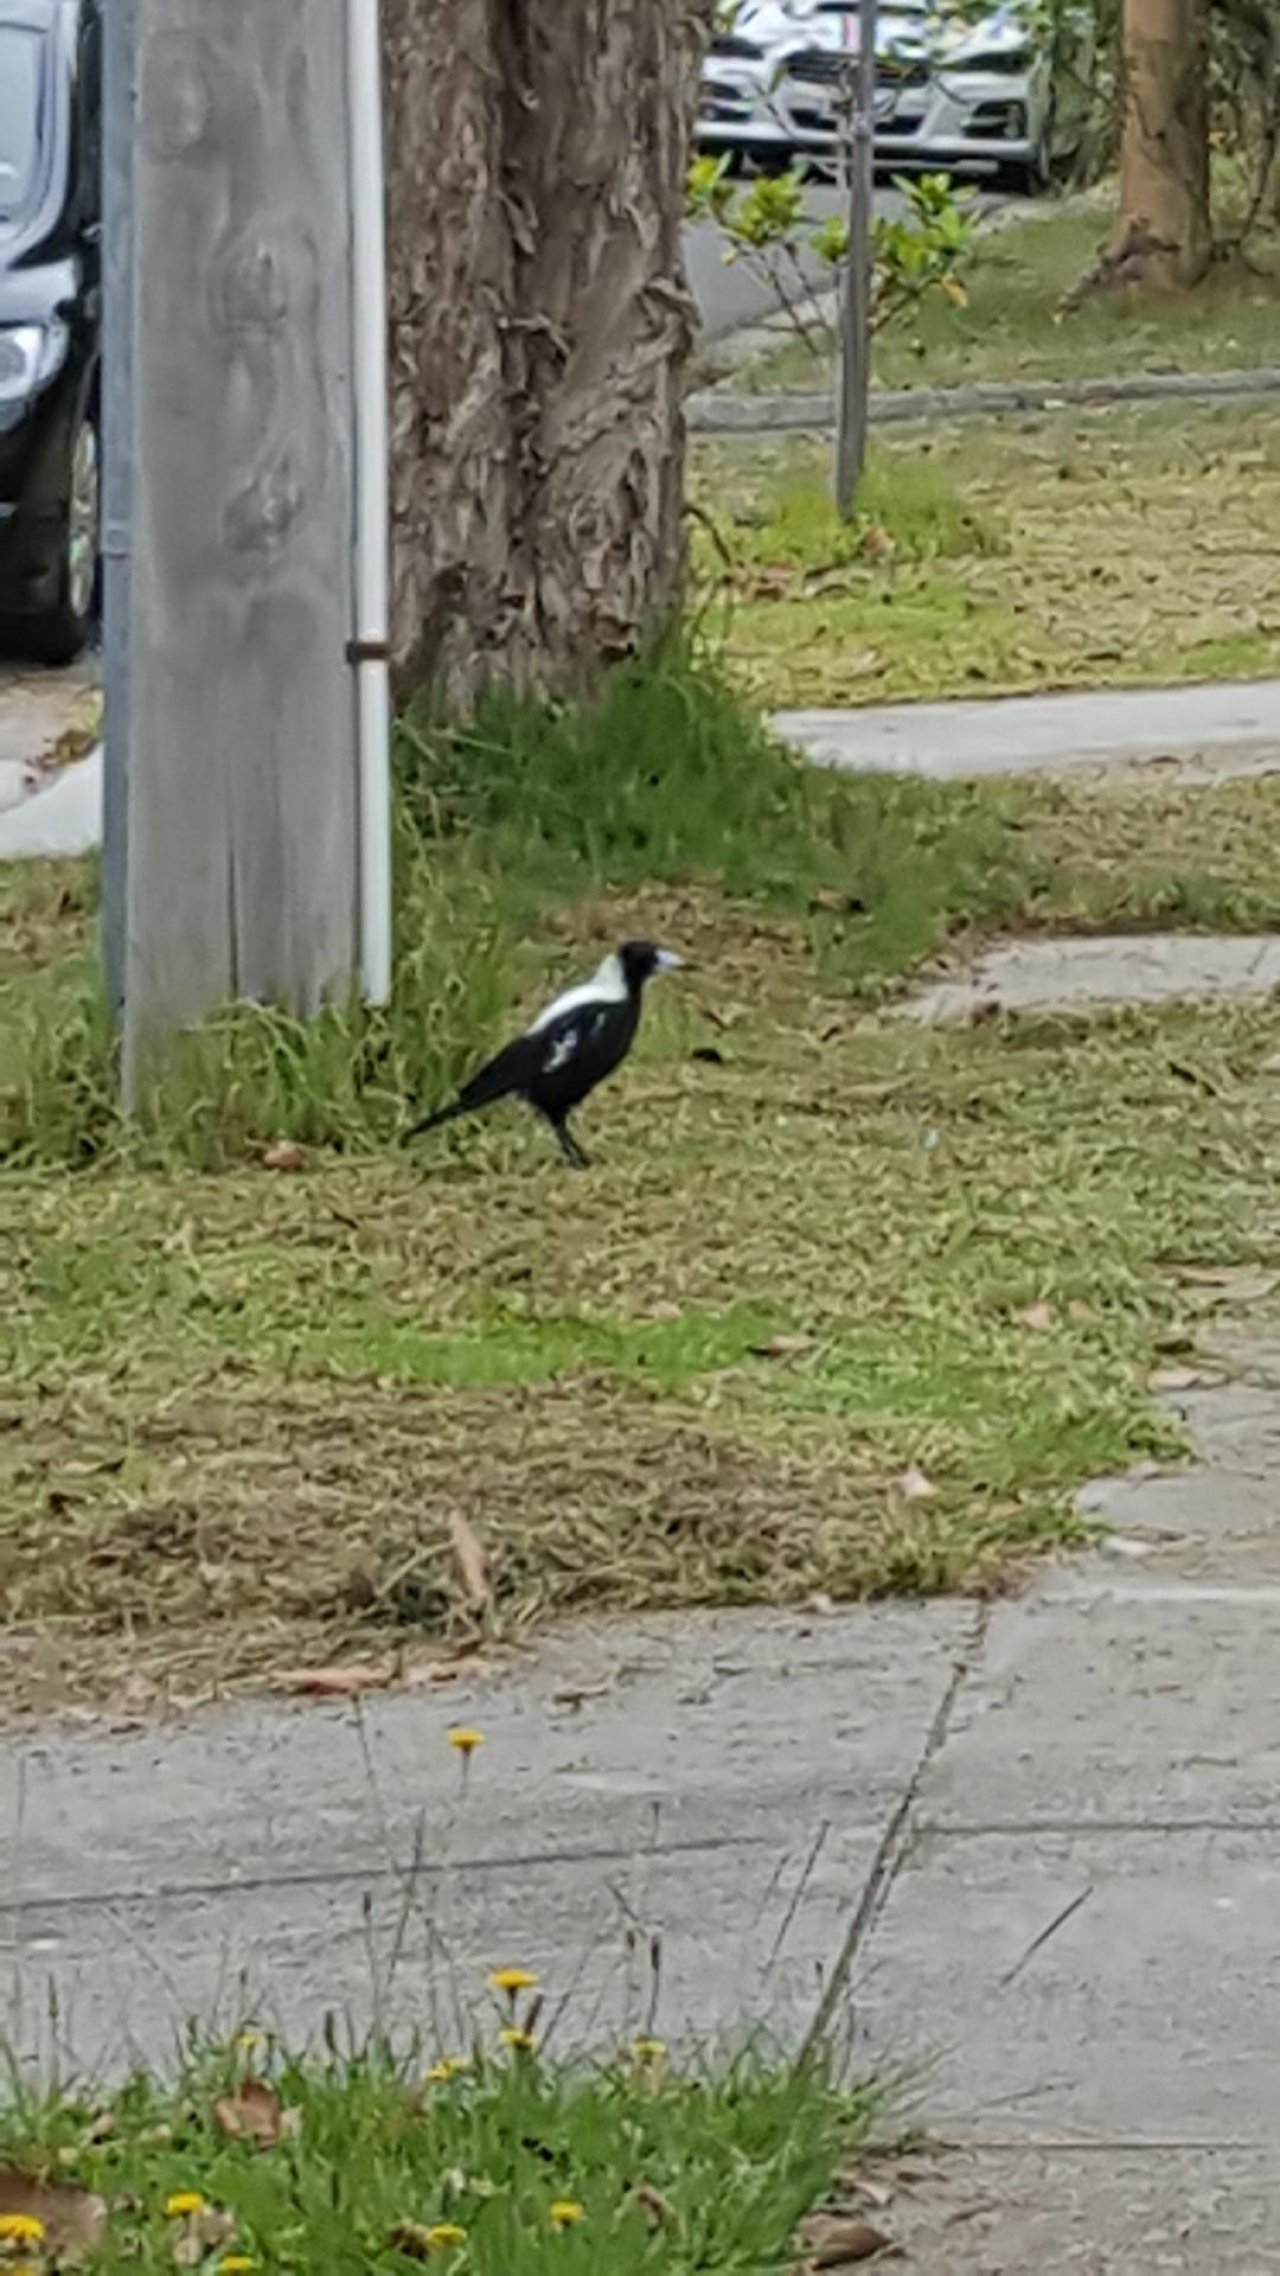 Australian Magpie in ClimateWatch App spotted by vnathan on 16.12.2020